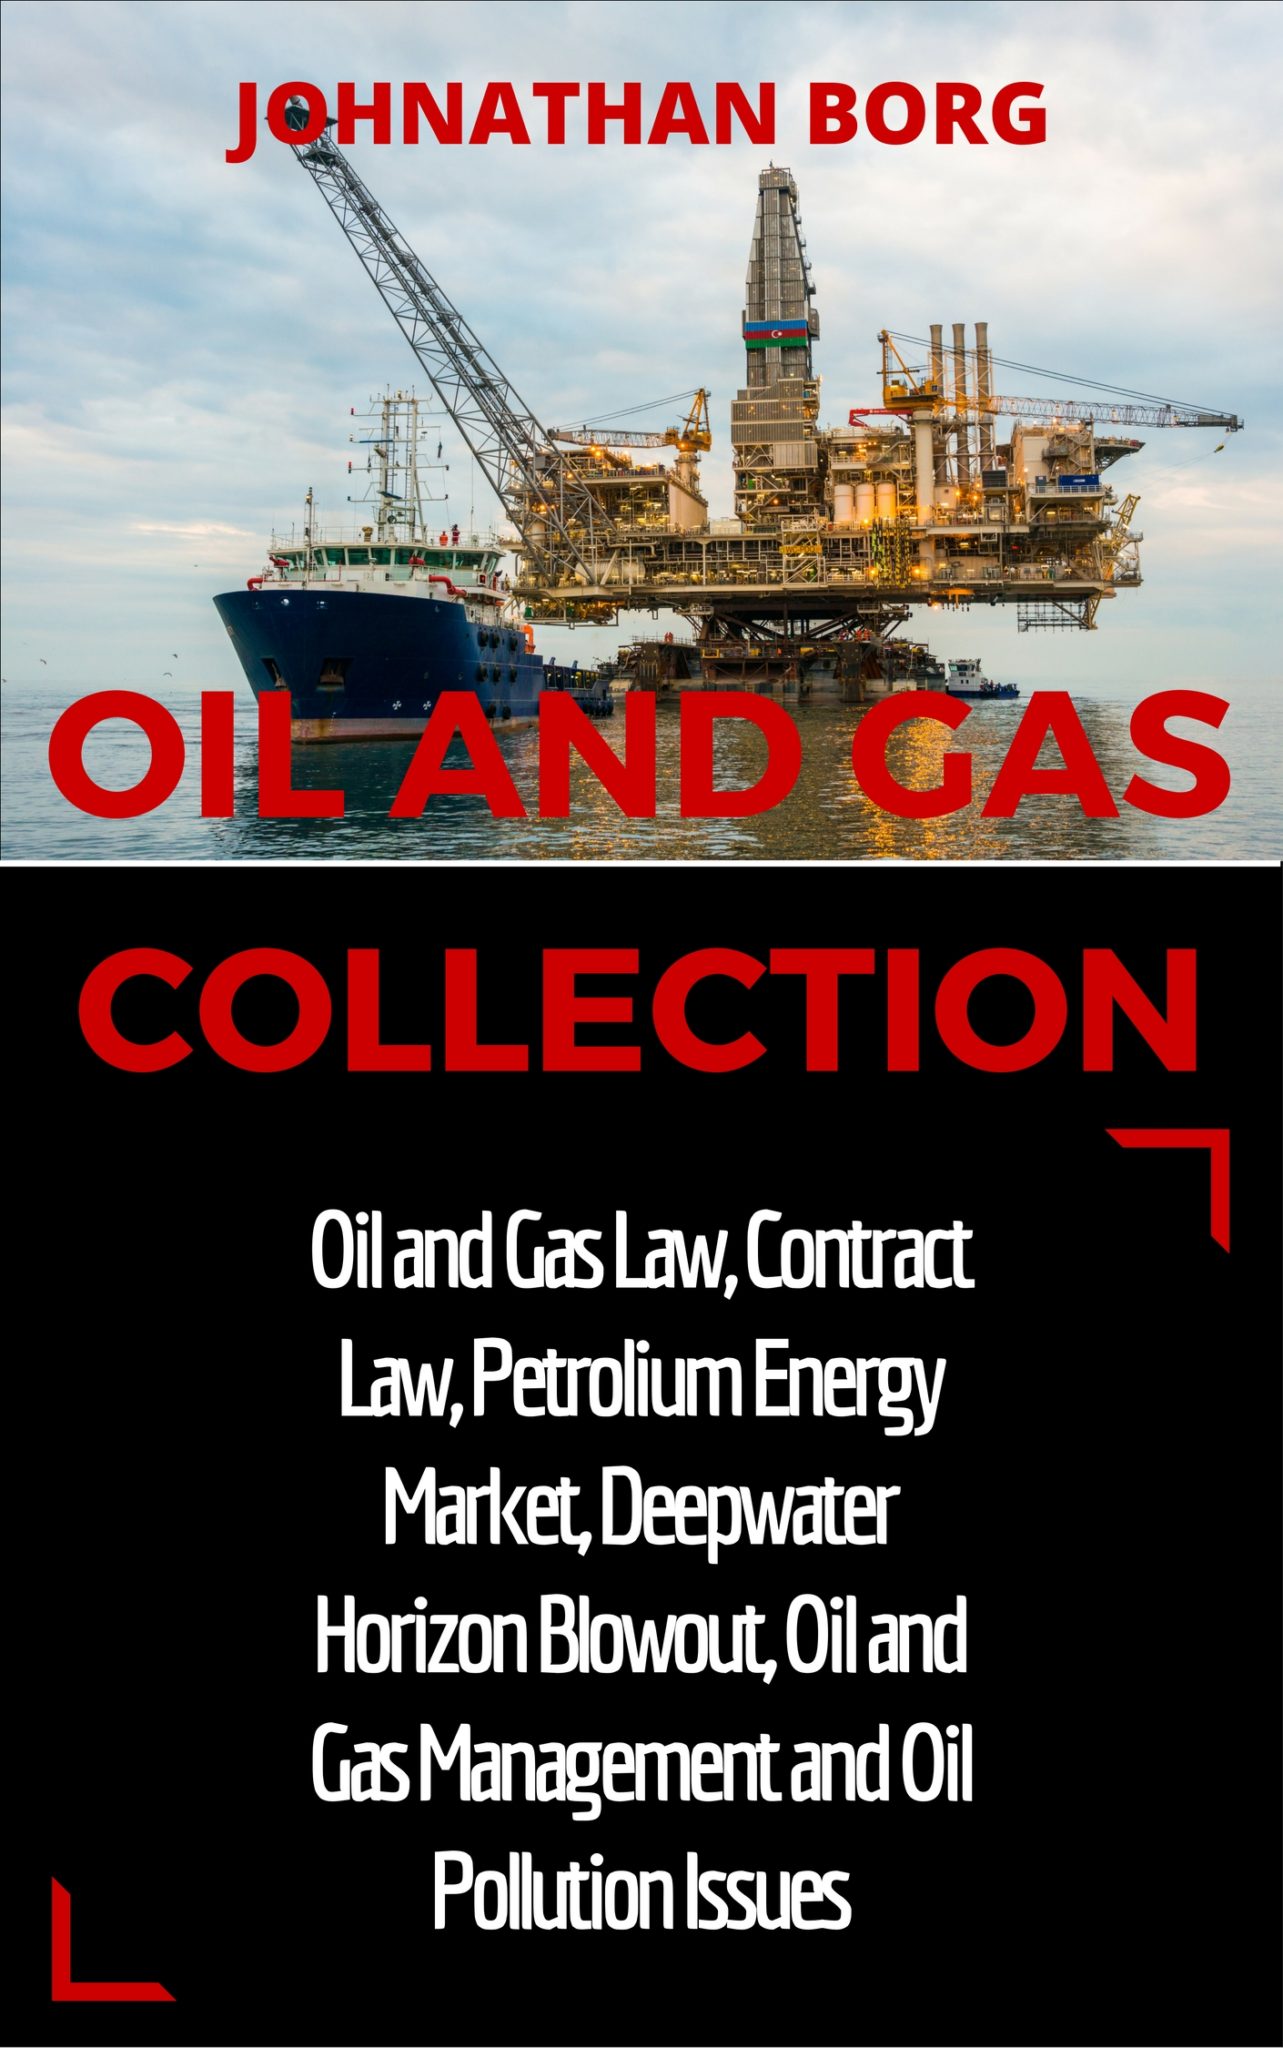 FREE: Oil and Gas Collection by Johnathan Borg